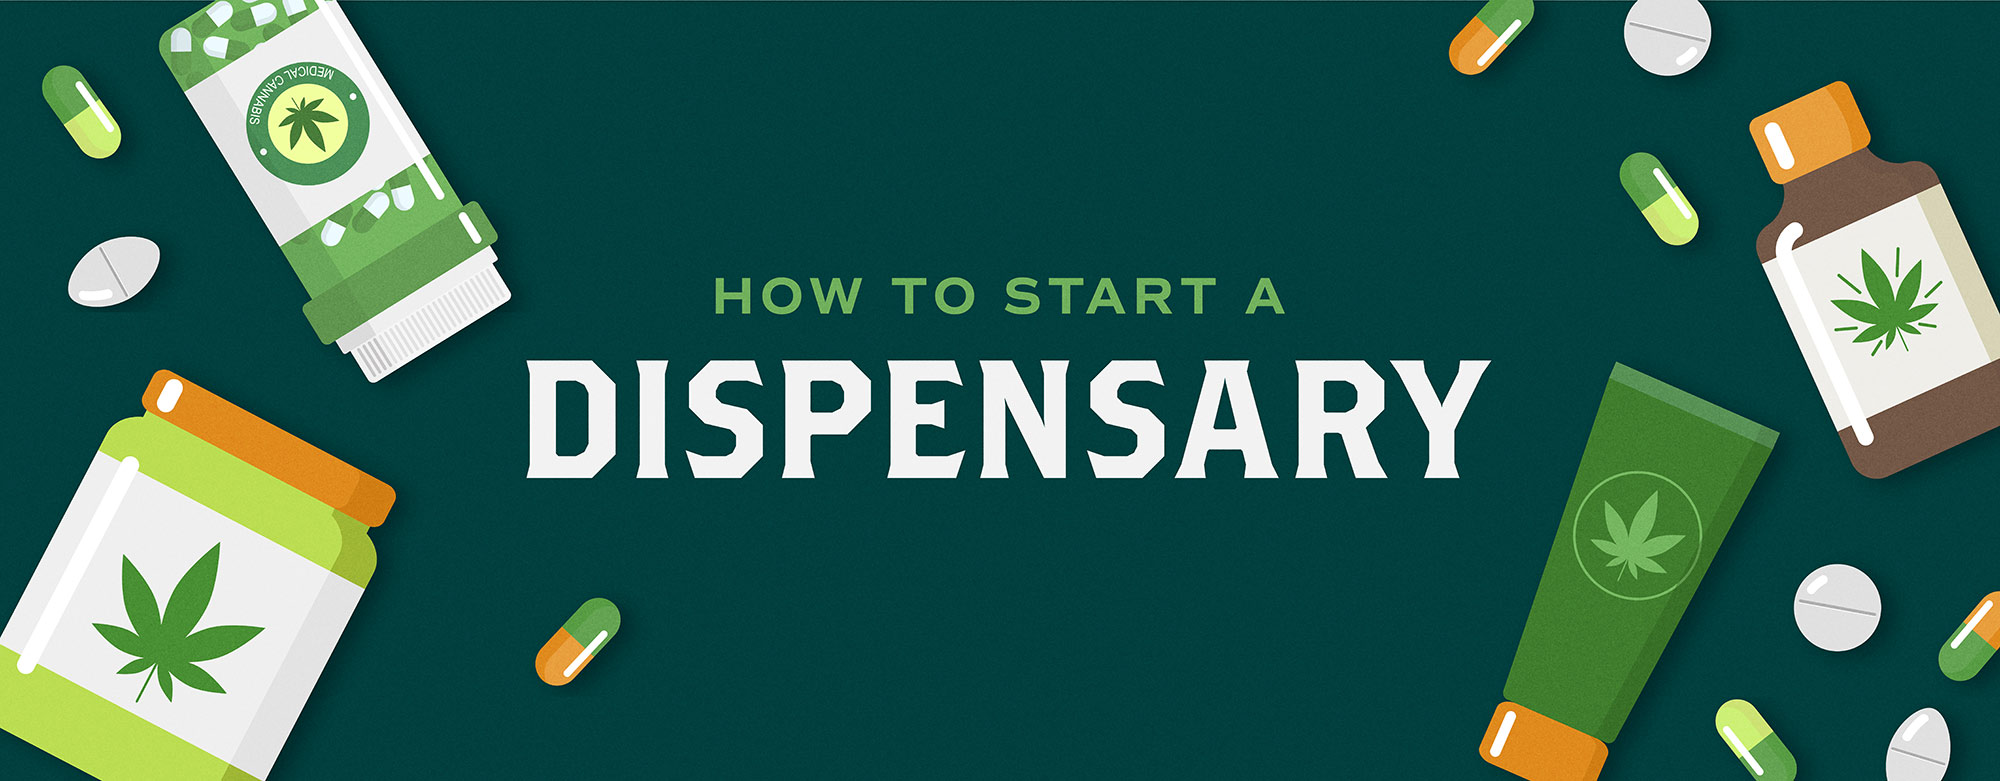 How to Start a Dispensary 